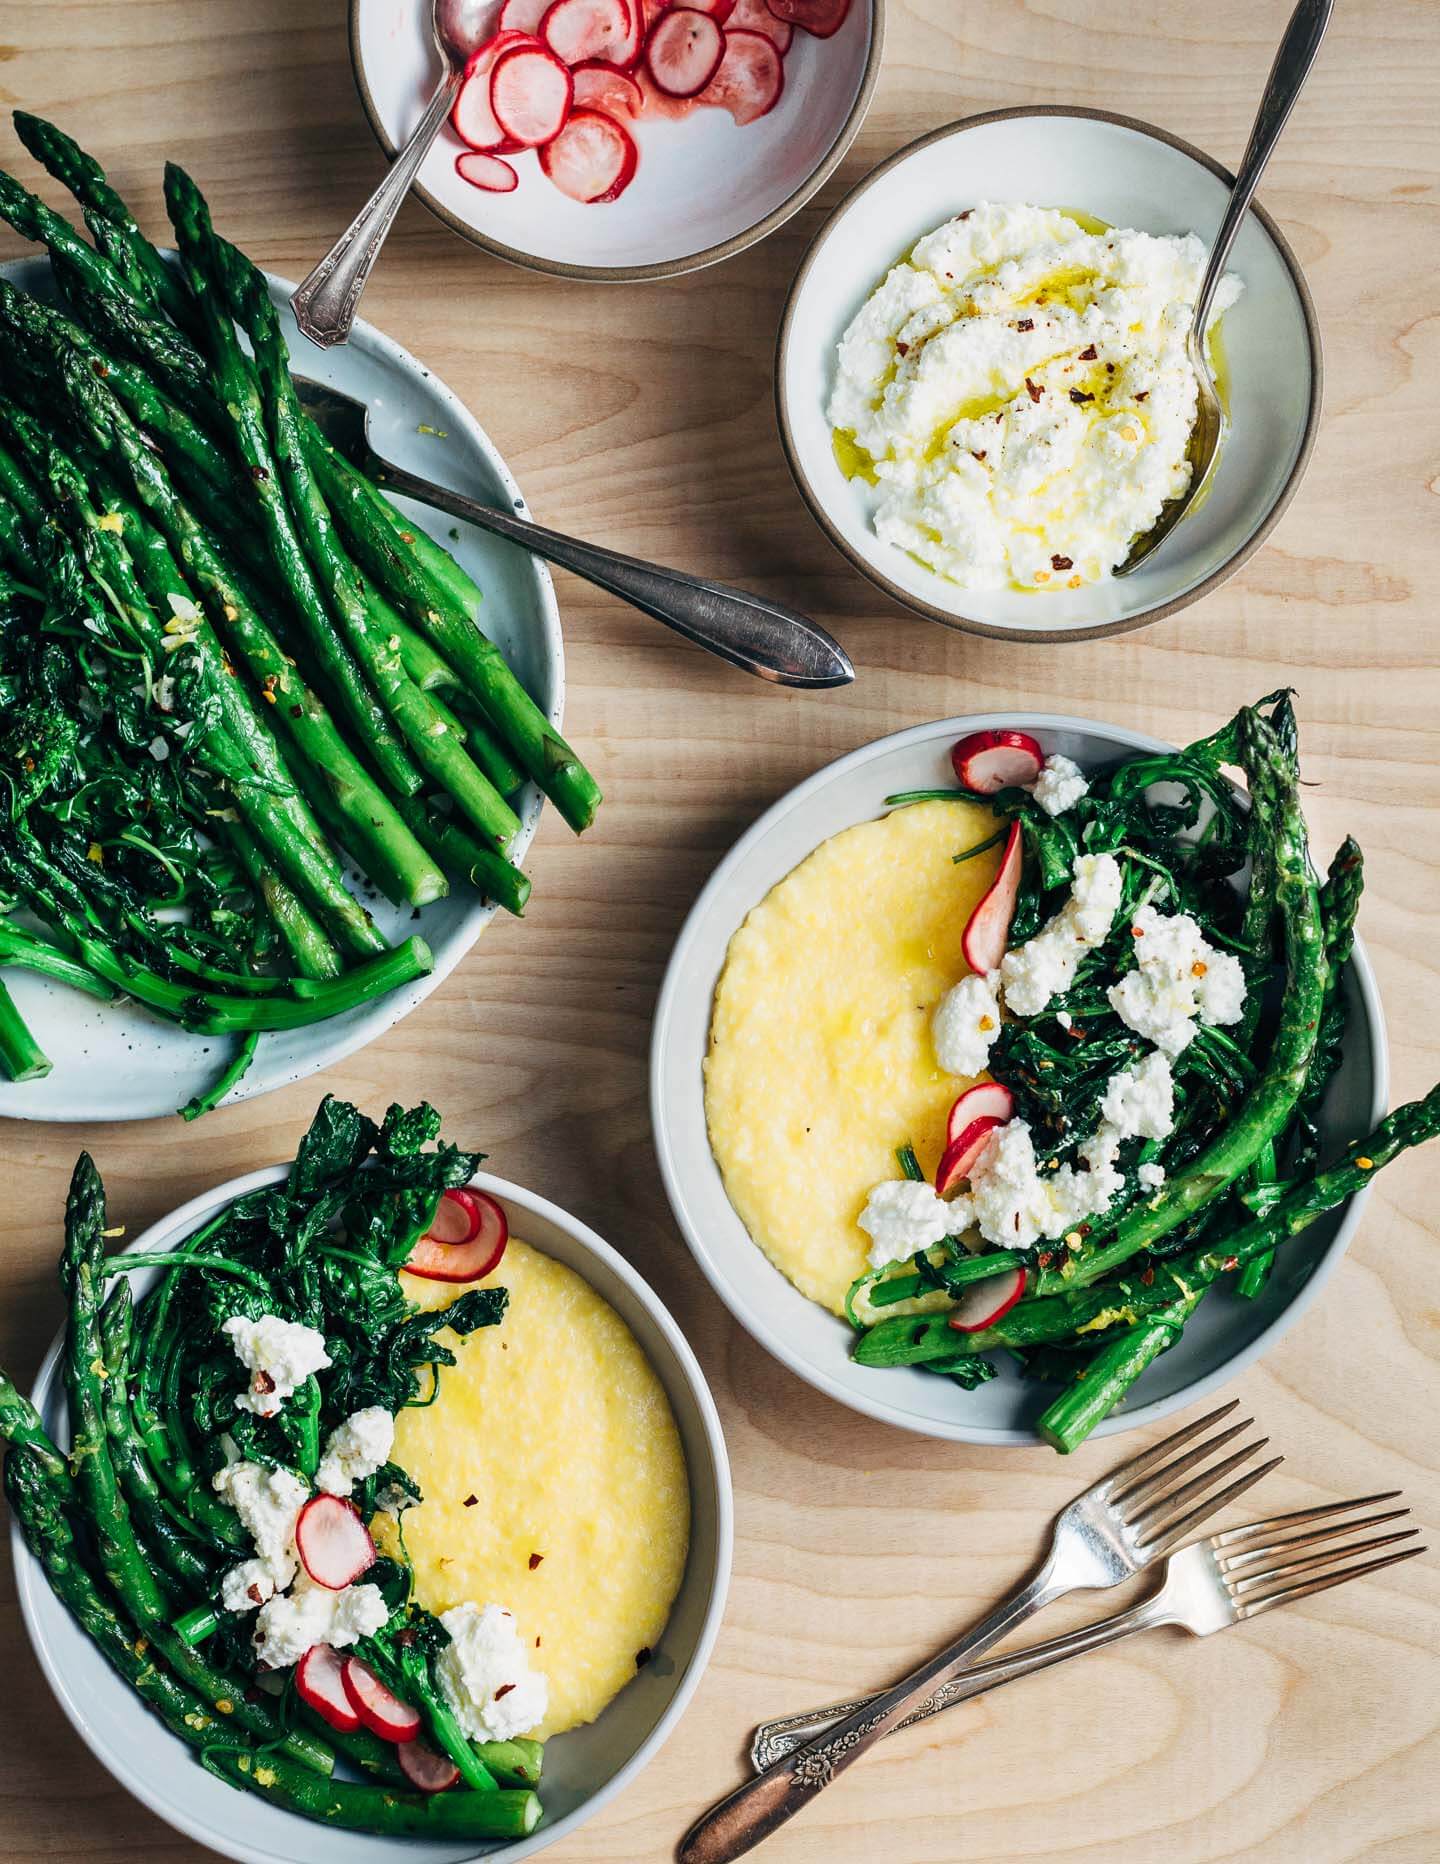 These versatile asparagus polenta bowls are a study in contrasting flavors and textures. Buttery polenta counters the bitter notes of spring greens and asparagus, while creamy ricotta tempers the heat of red pepper flakes and young garlic. 